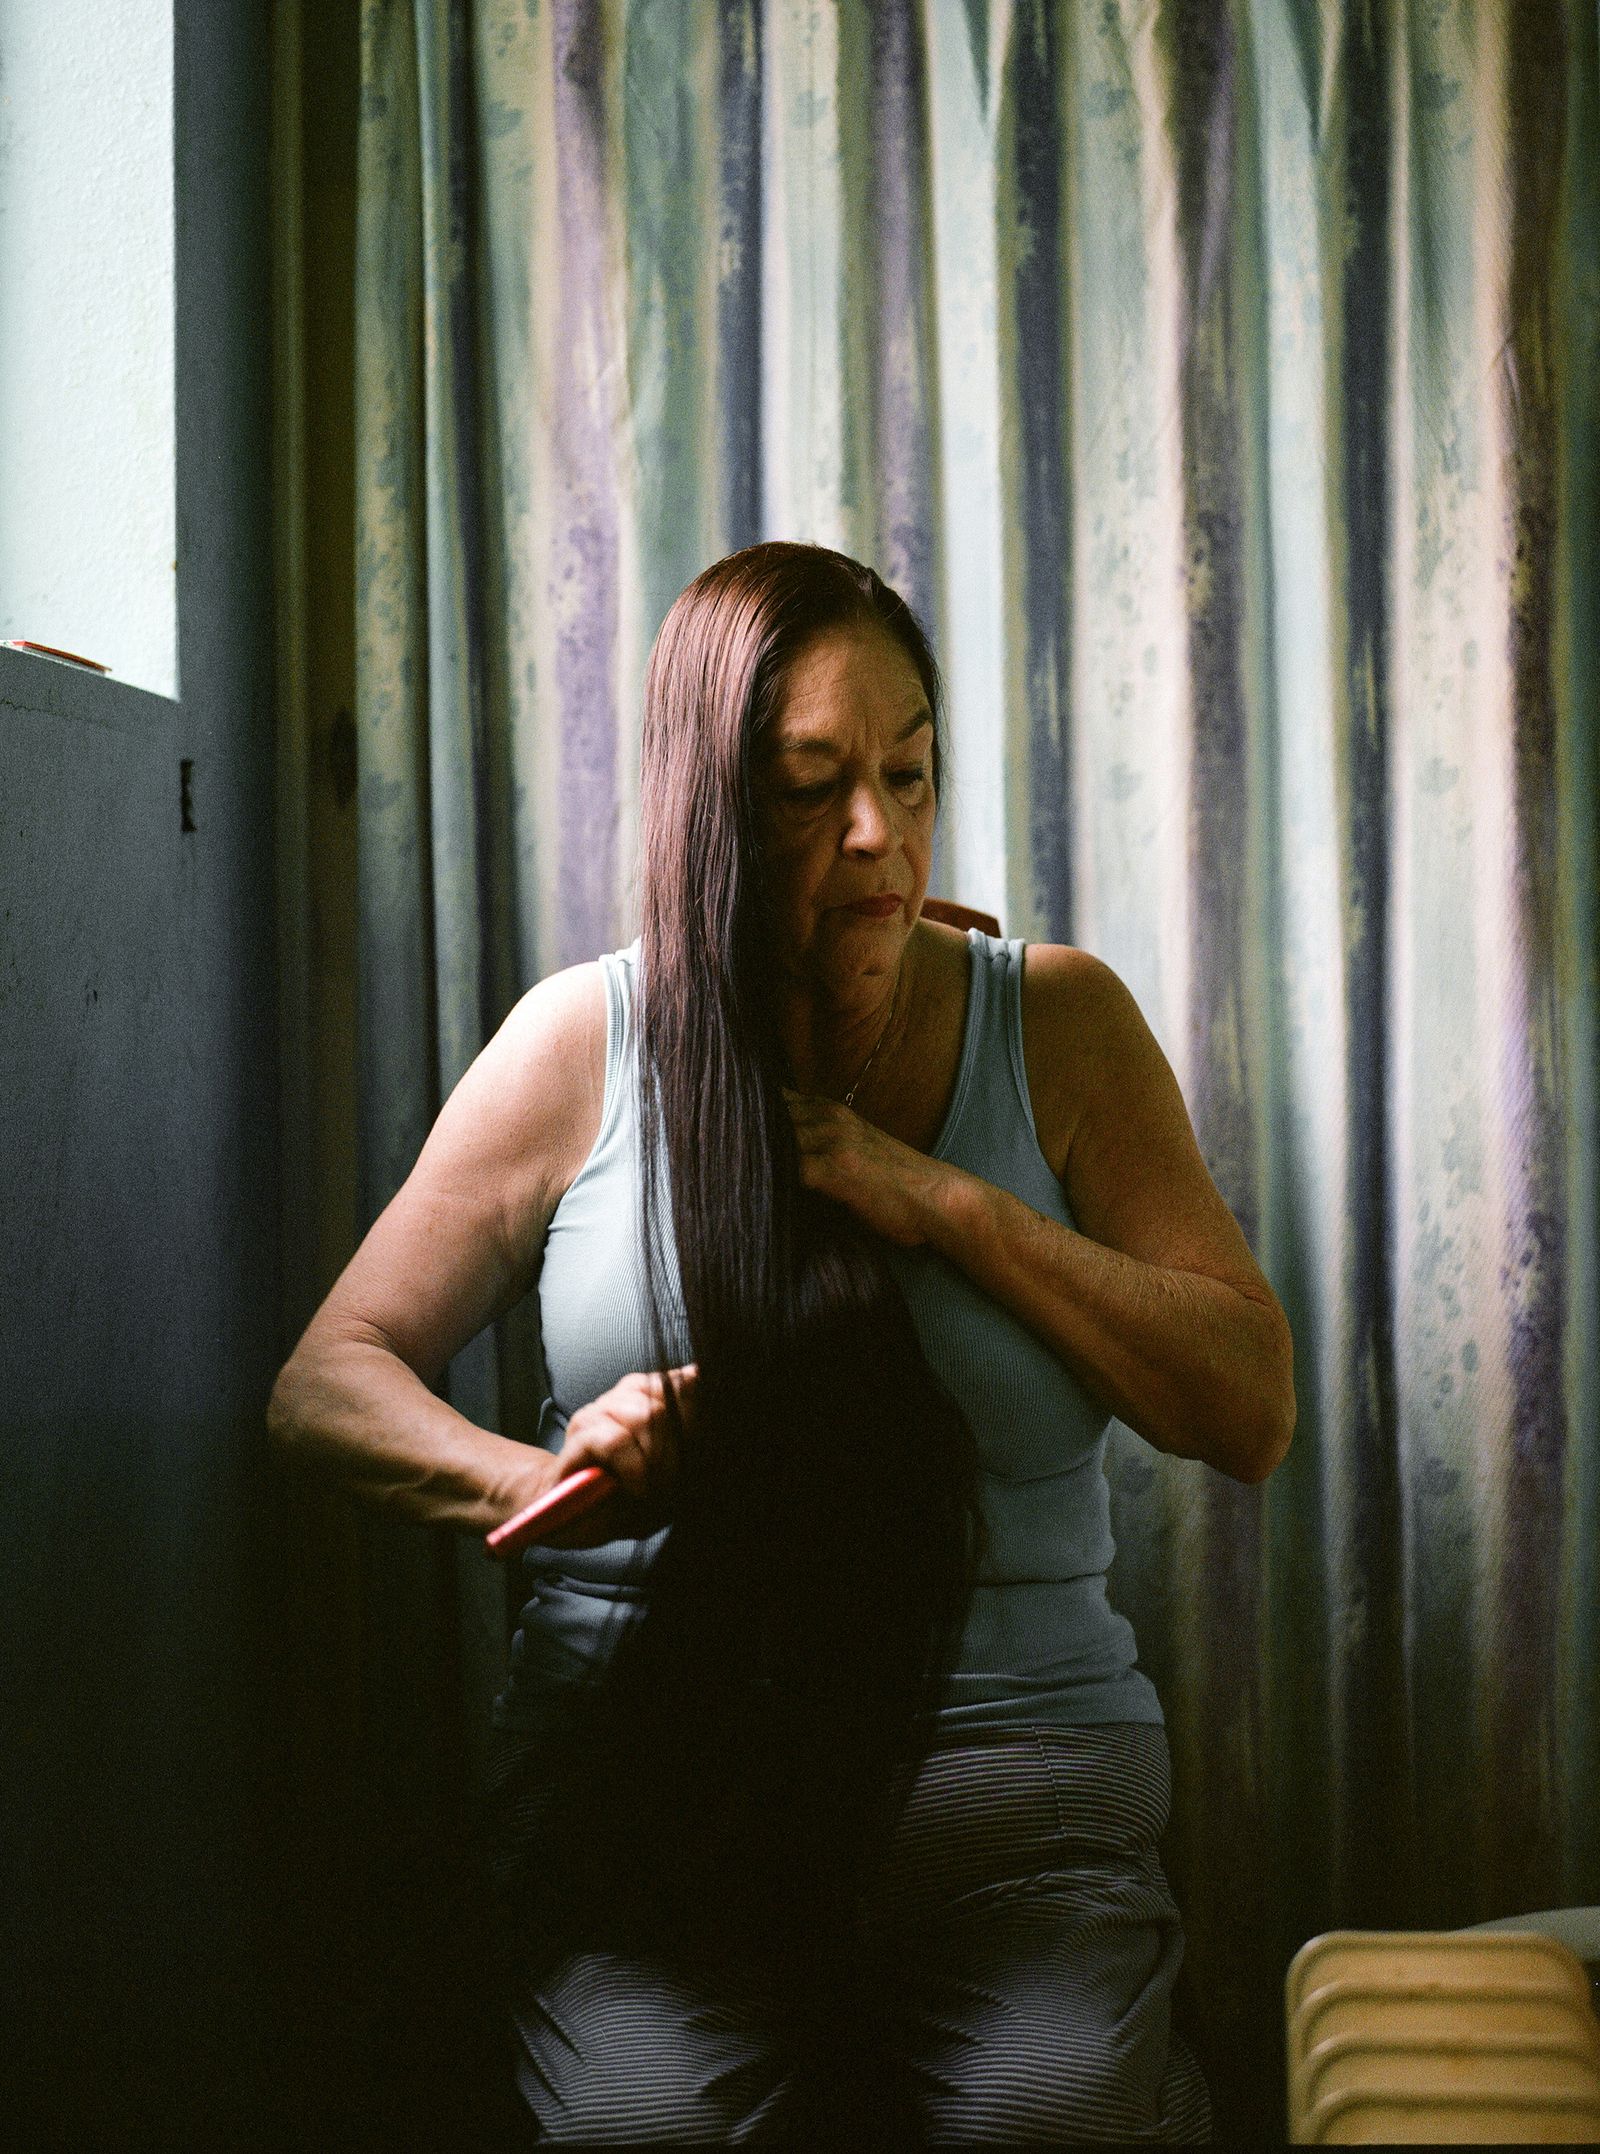 © Justin Maxon - Image from the Reservation High photography project